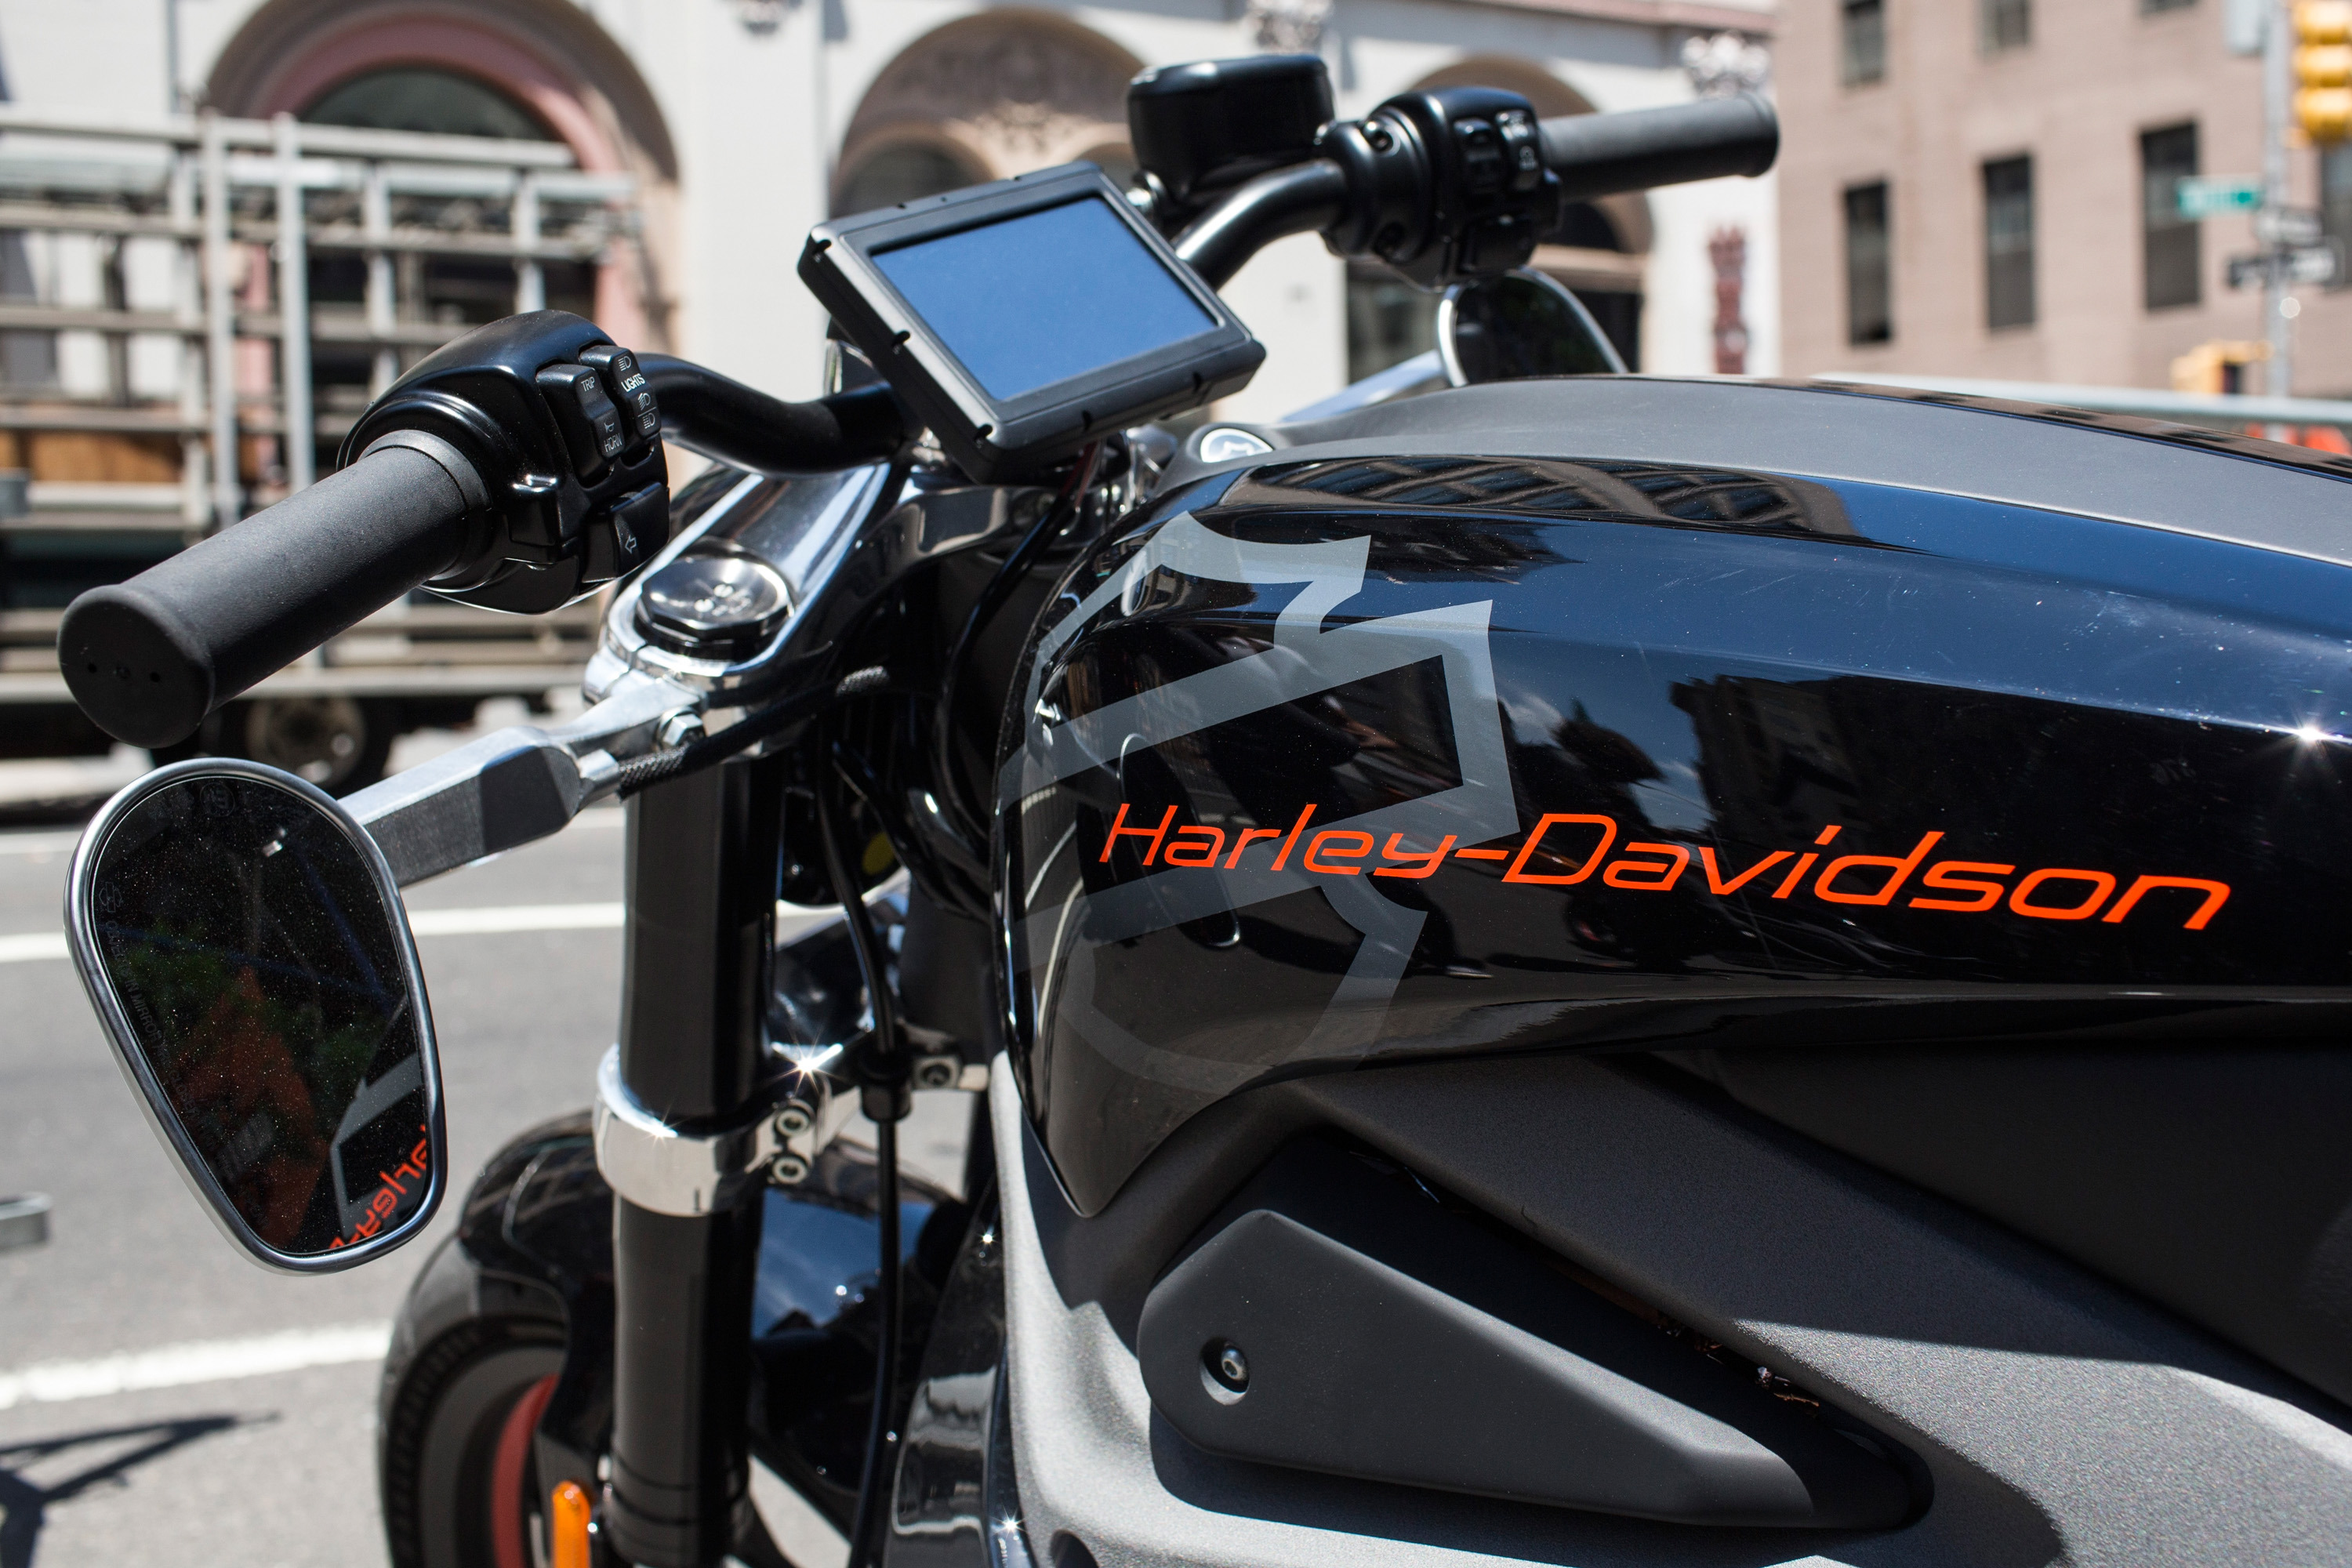 A Harley Davidson Livewire motorcycle, Harley Davidson's first electric bike, sits on display outside the Harley Davidson Store on June 23, 2014 in New York City. (Andrew Burton—Getty Images)